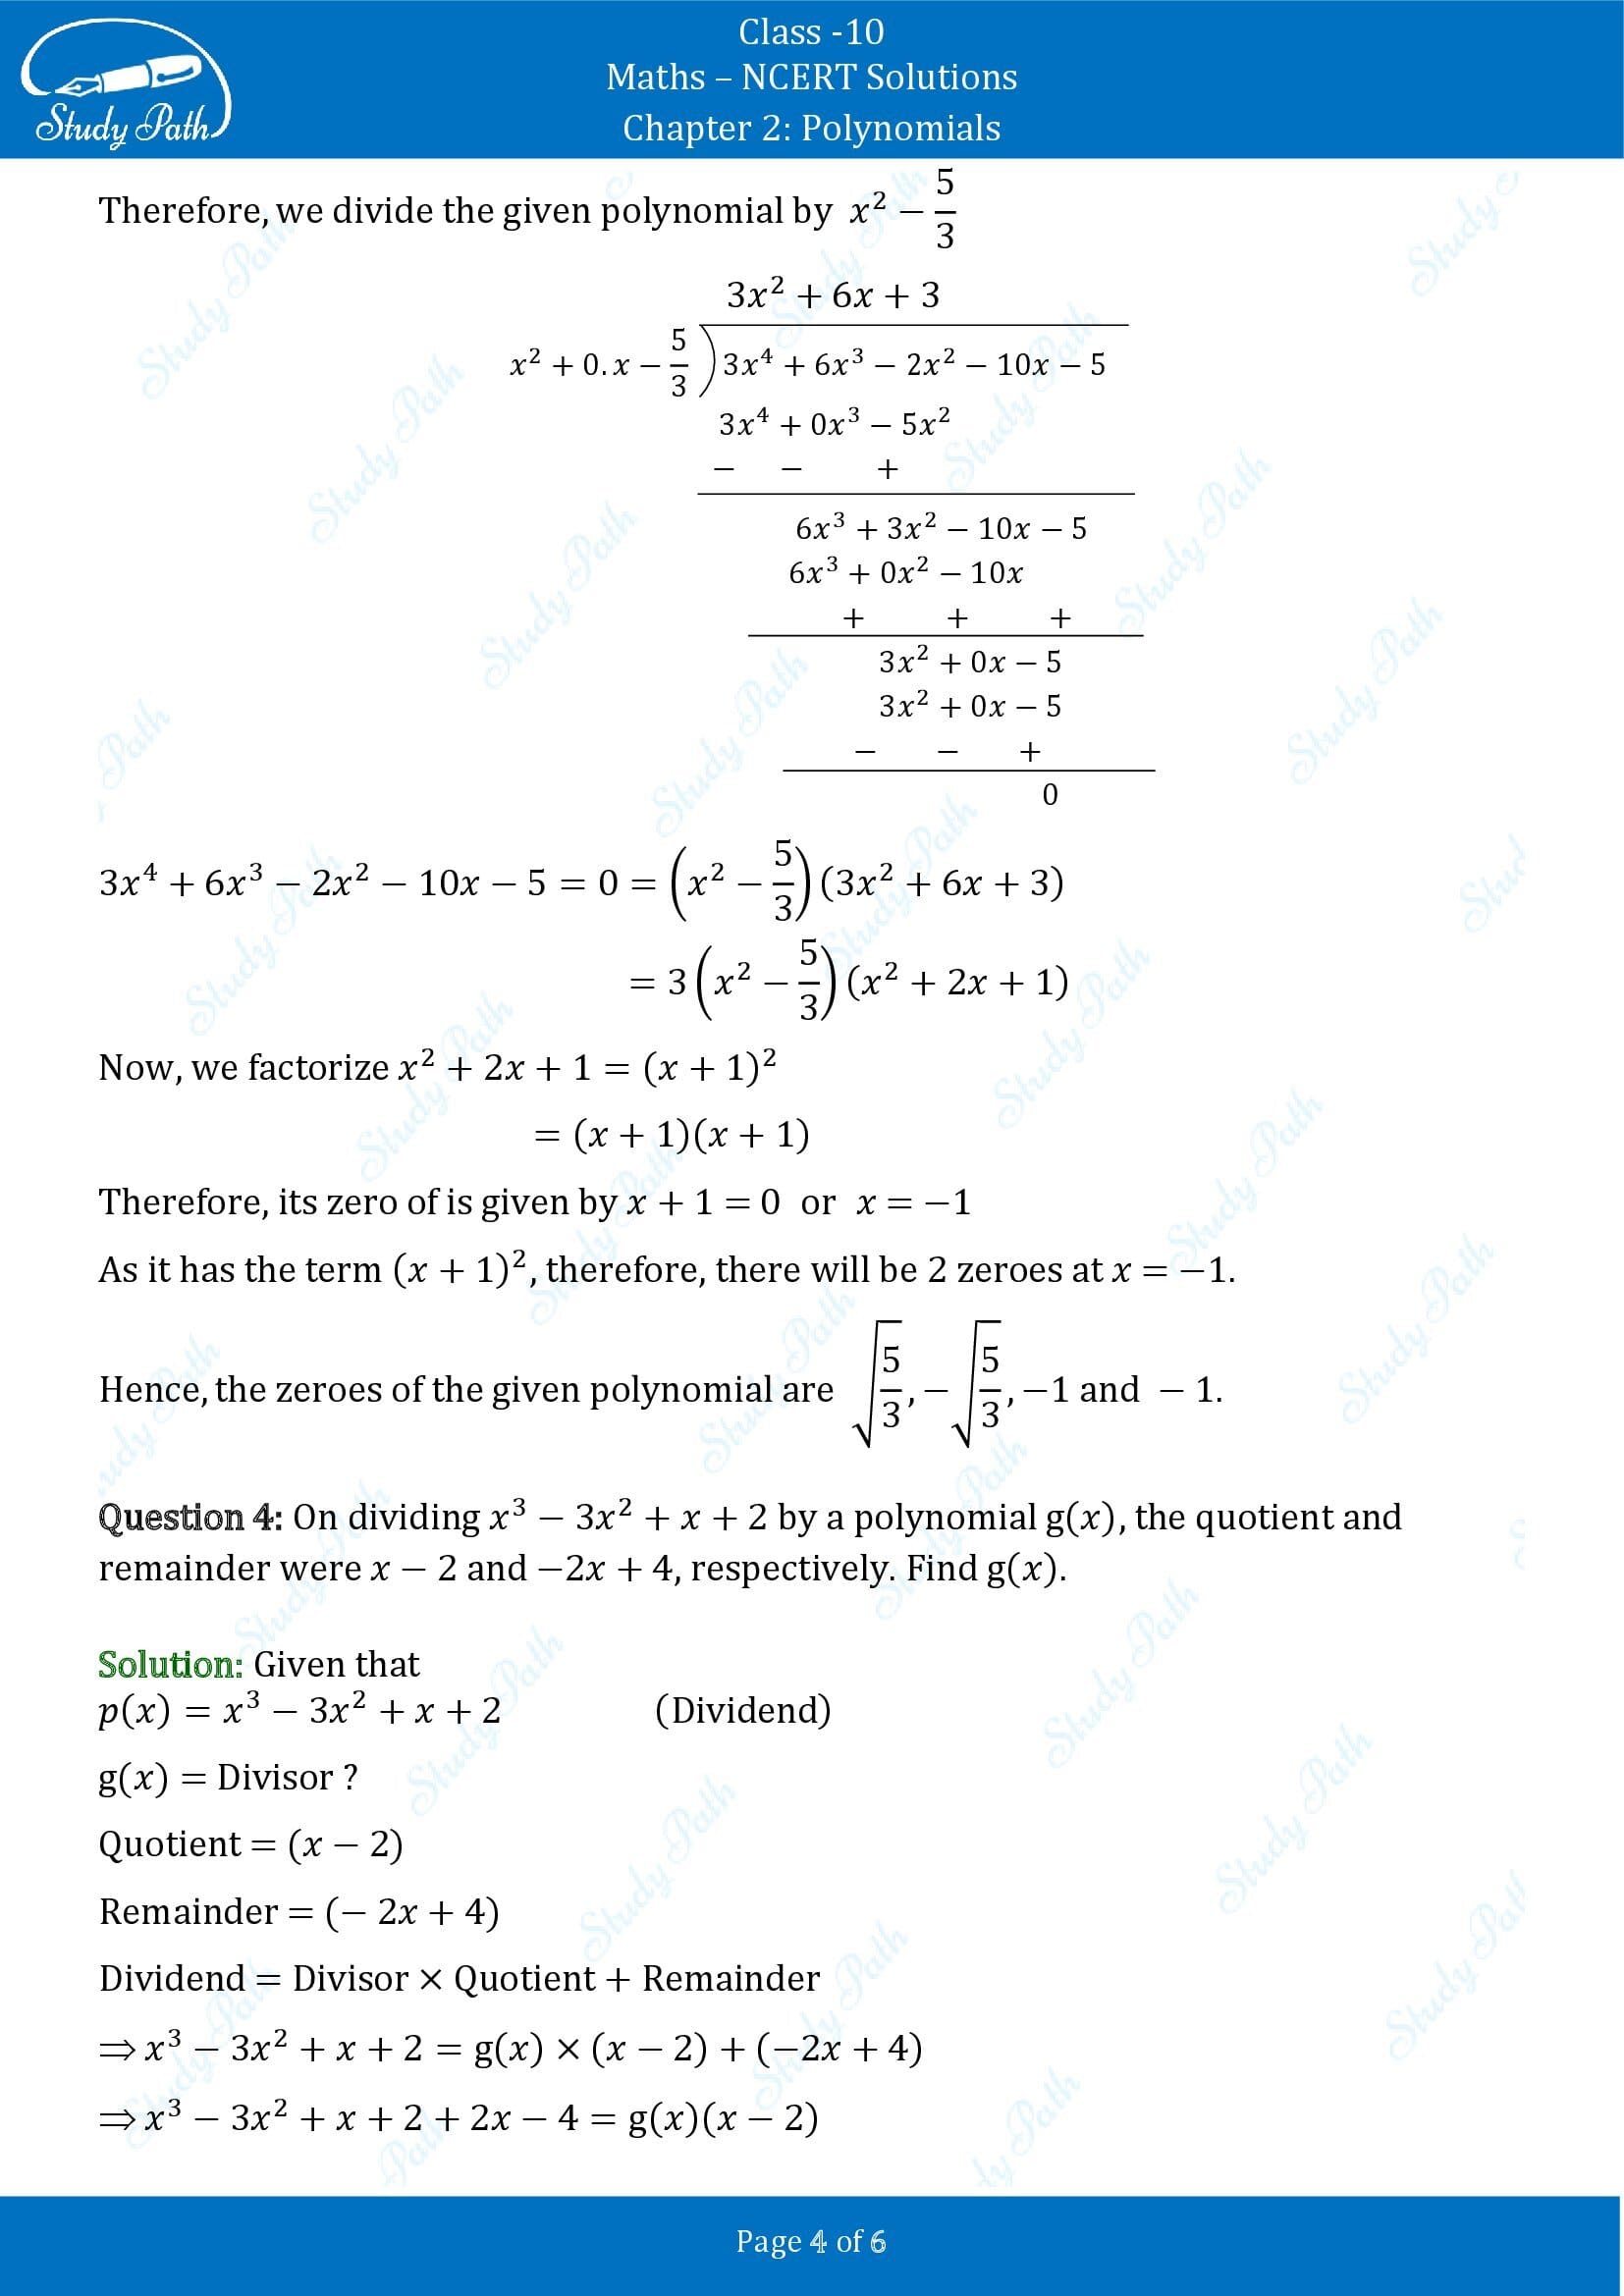 NCERT Solutions for Class 10 Maths Chapter 2 Polynomials Exercise 2.3 00004